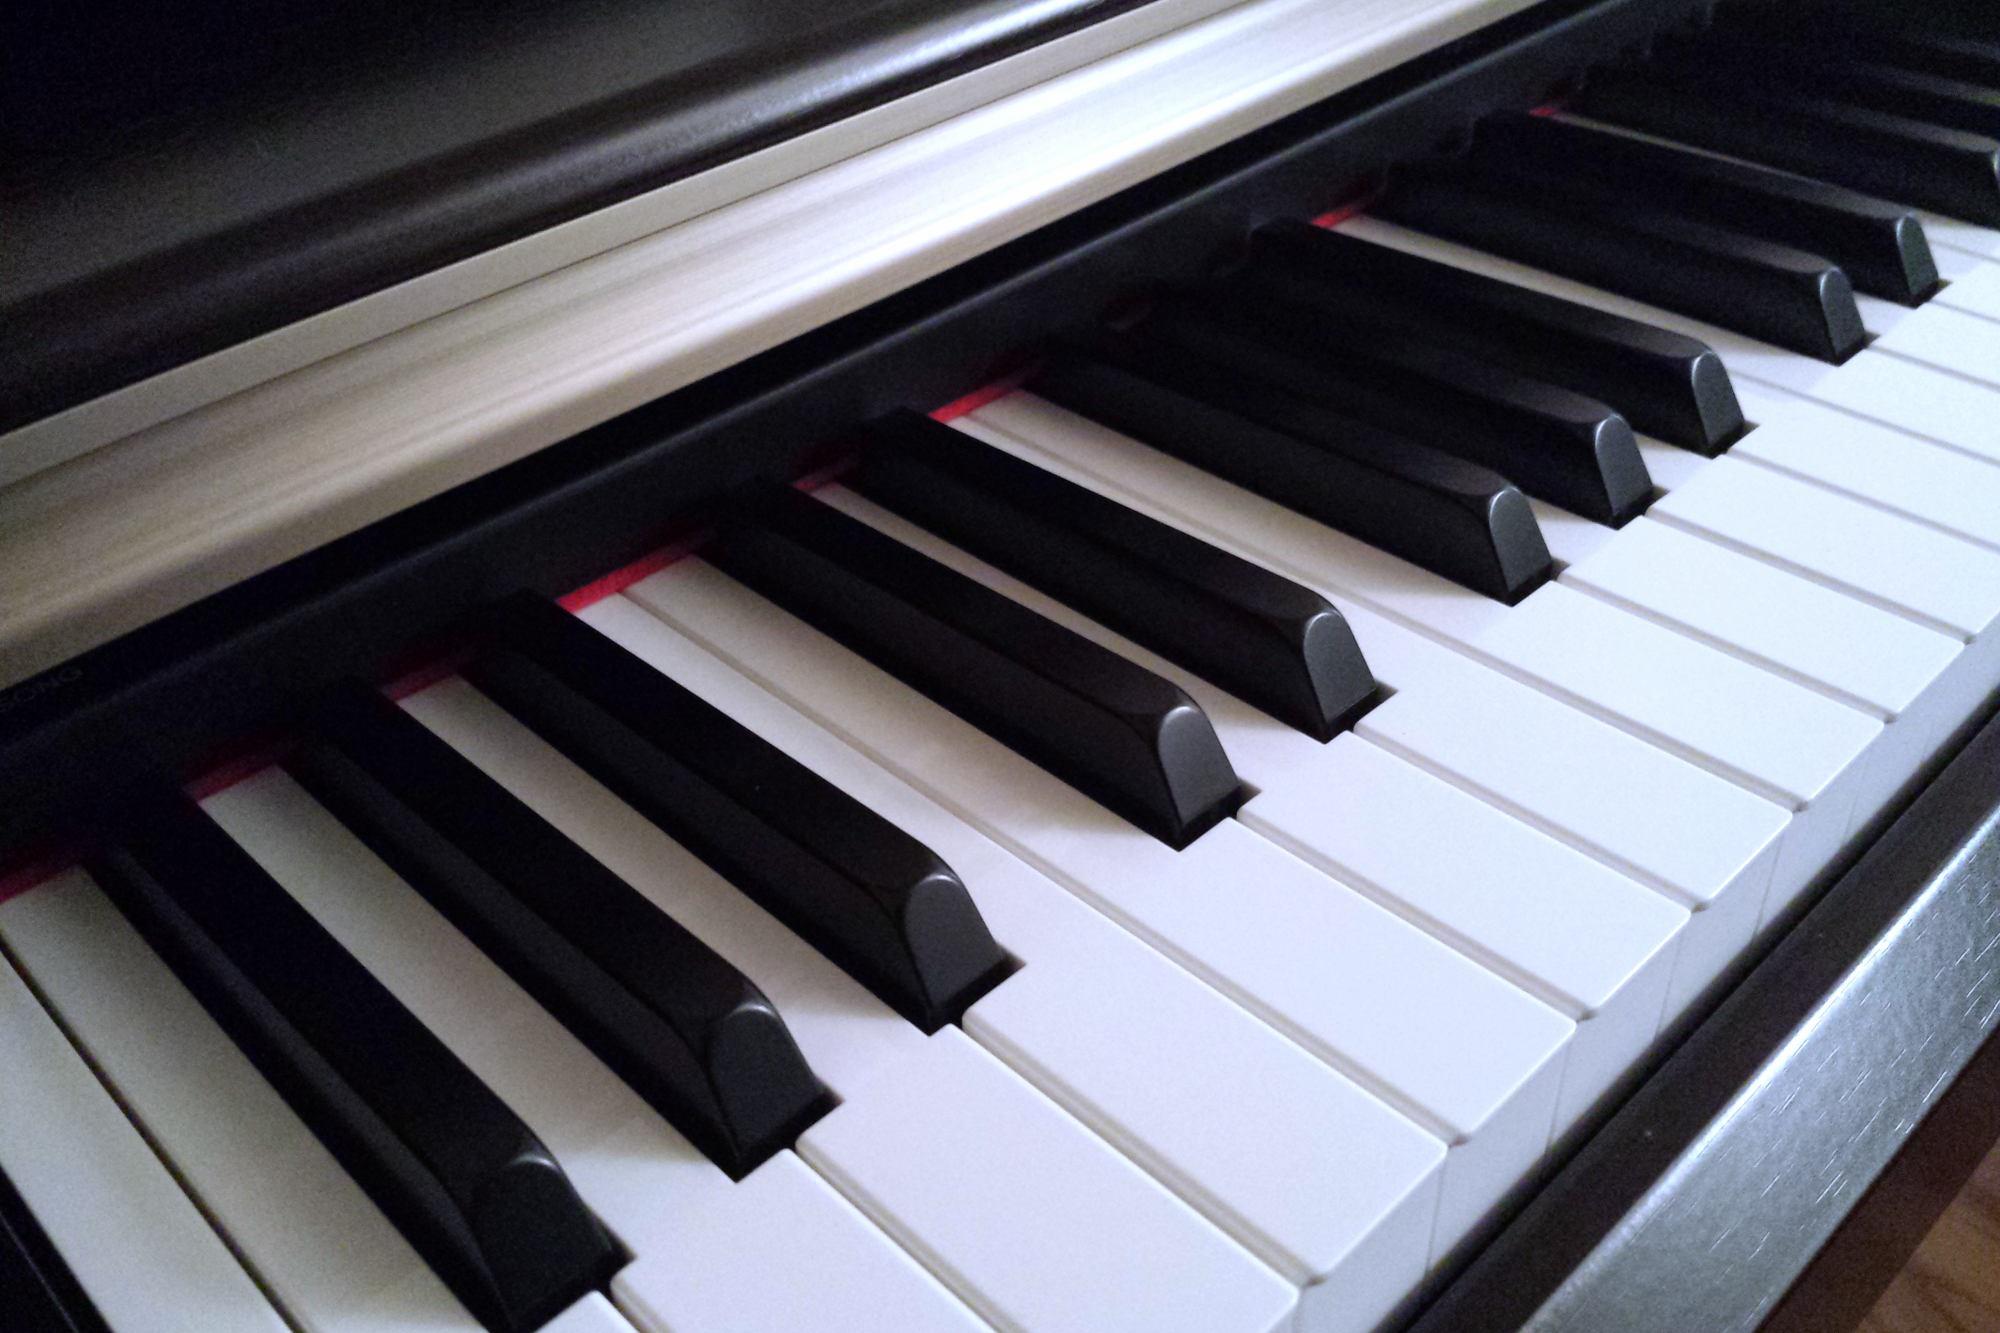 Close-up photo of the keys of a piano